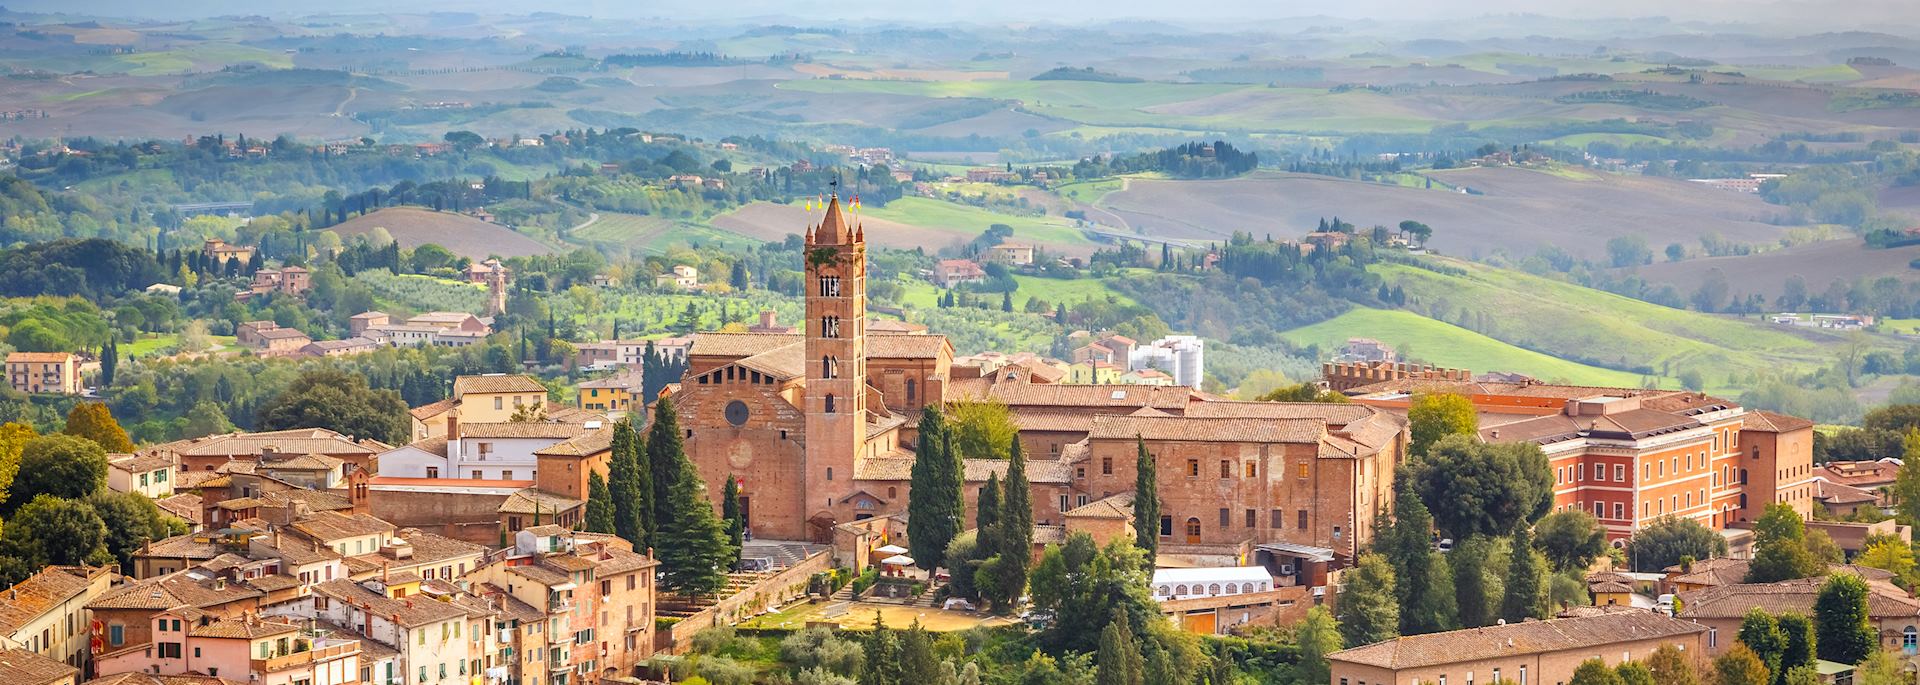 Aerial view over Siena